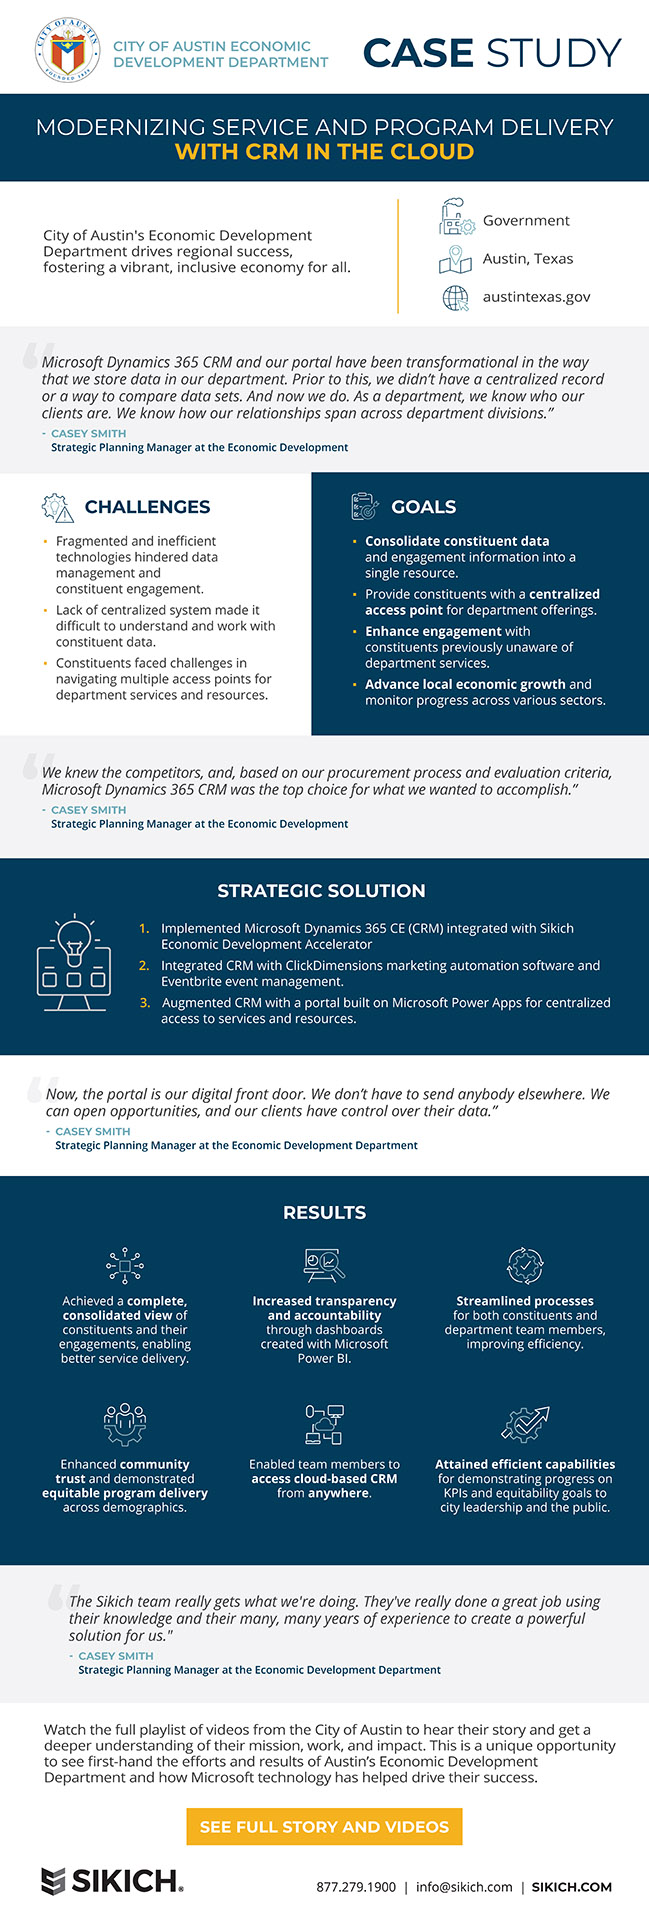 Dynamics 365 CE infographic